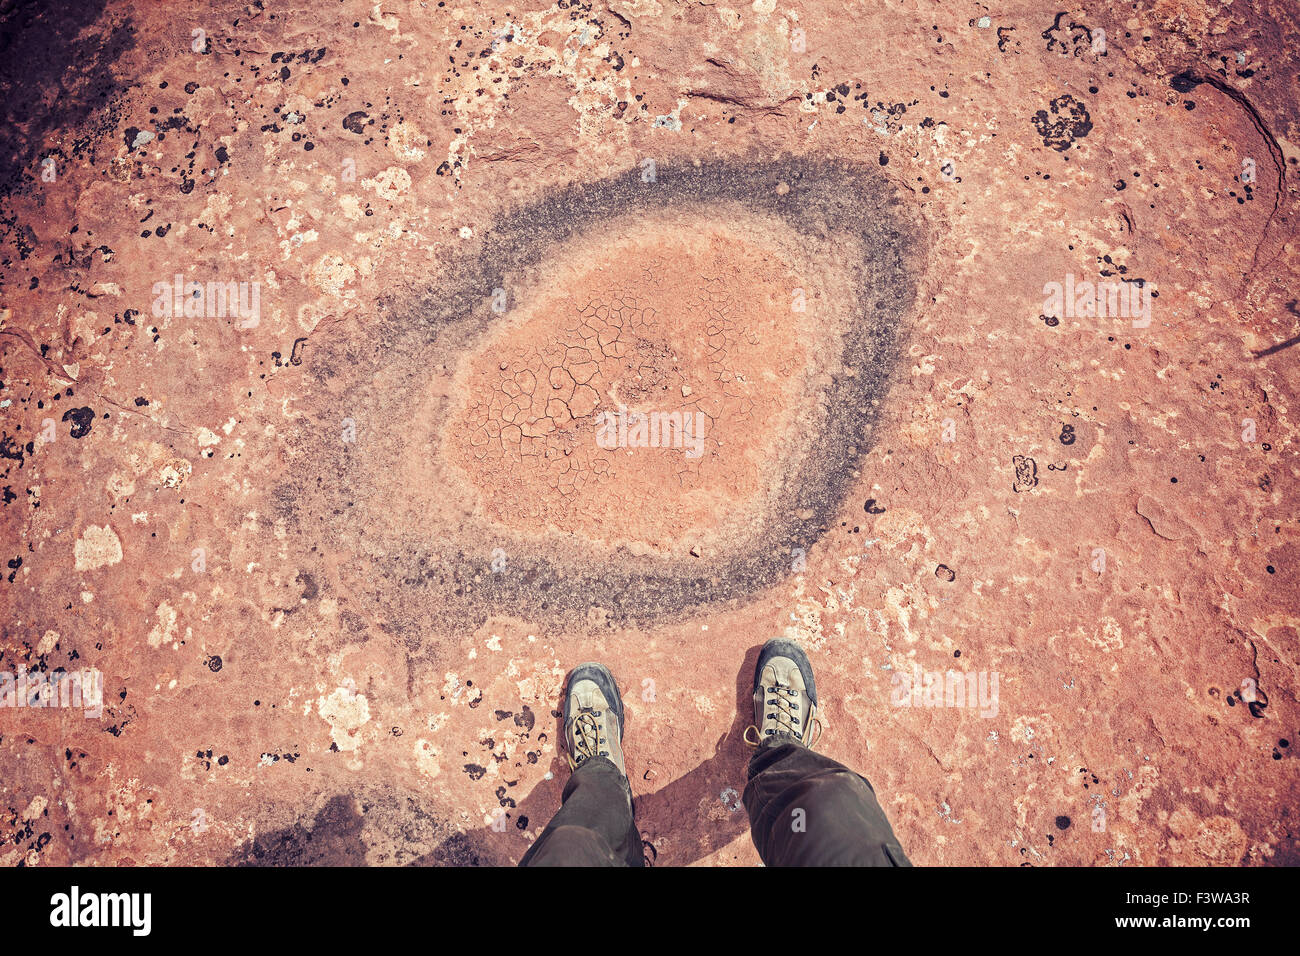 Feet standing in front of dried out puddle, climate change concept. Stock Photo